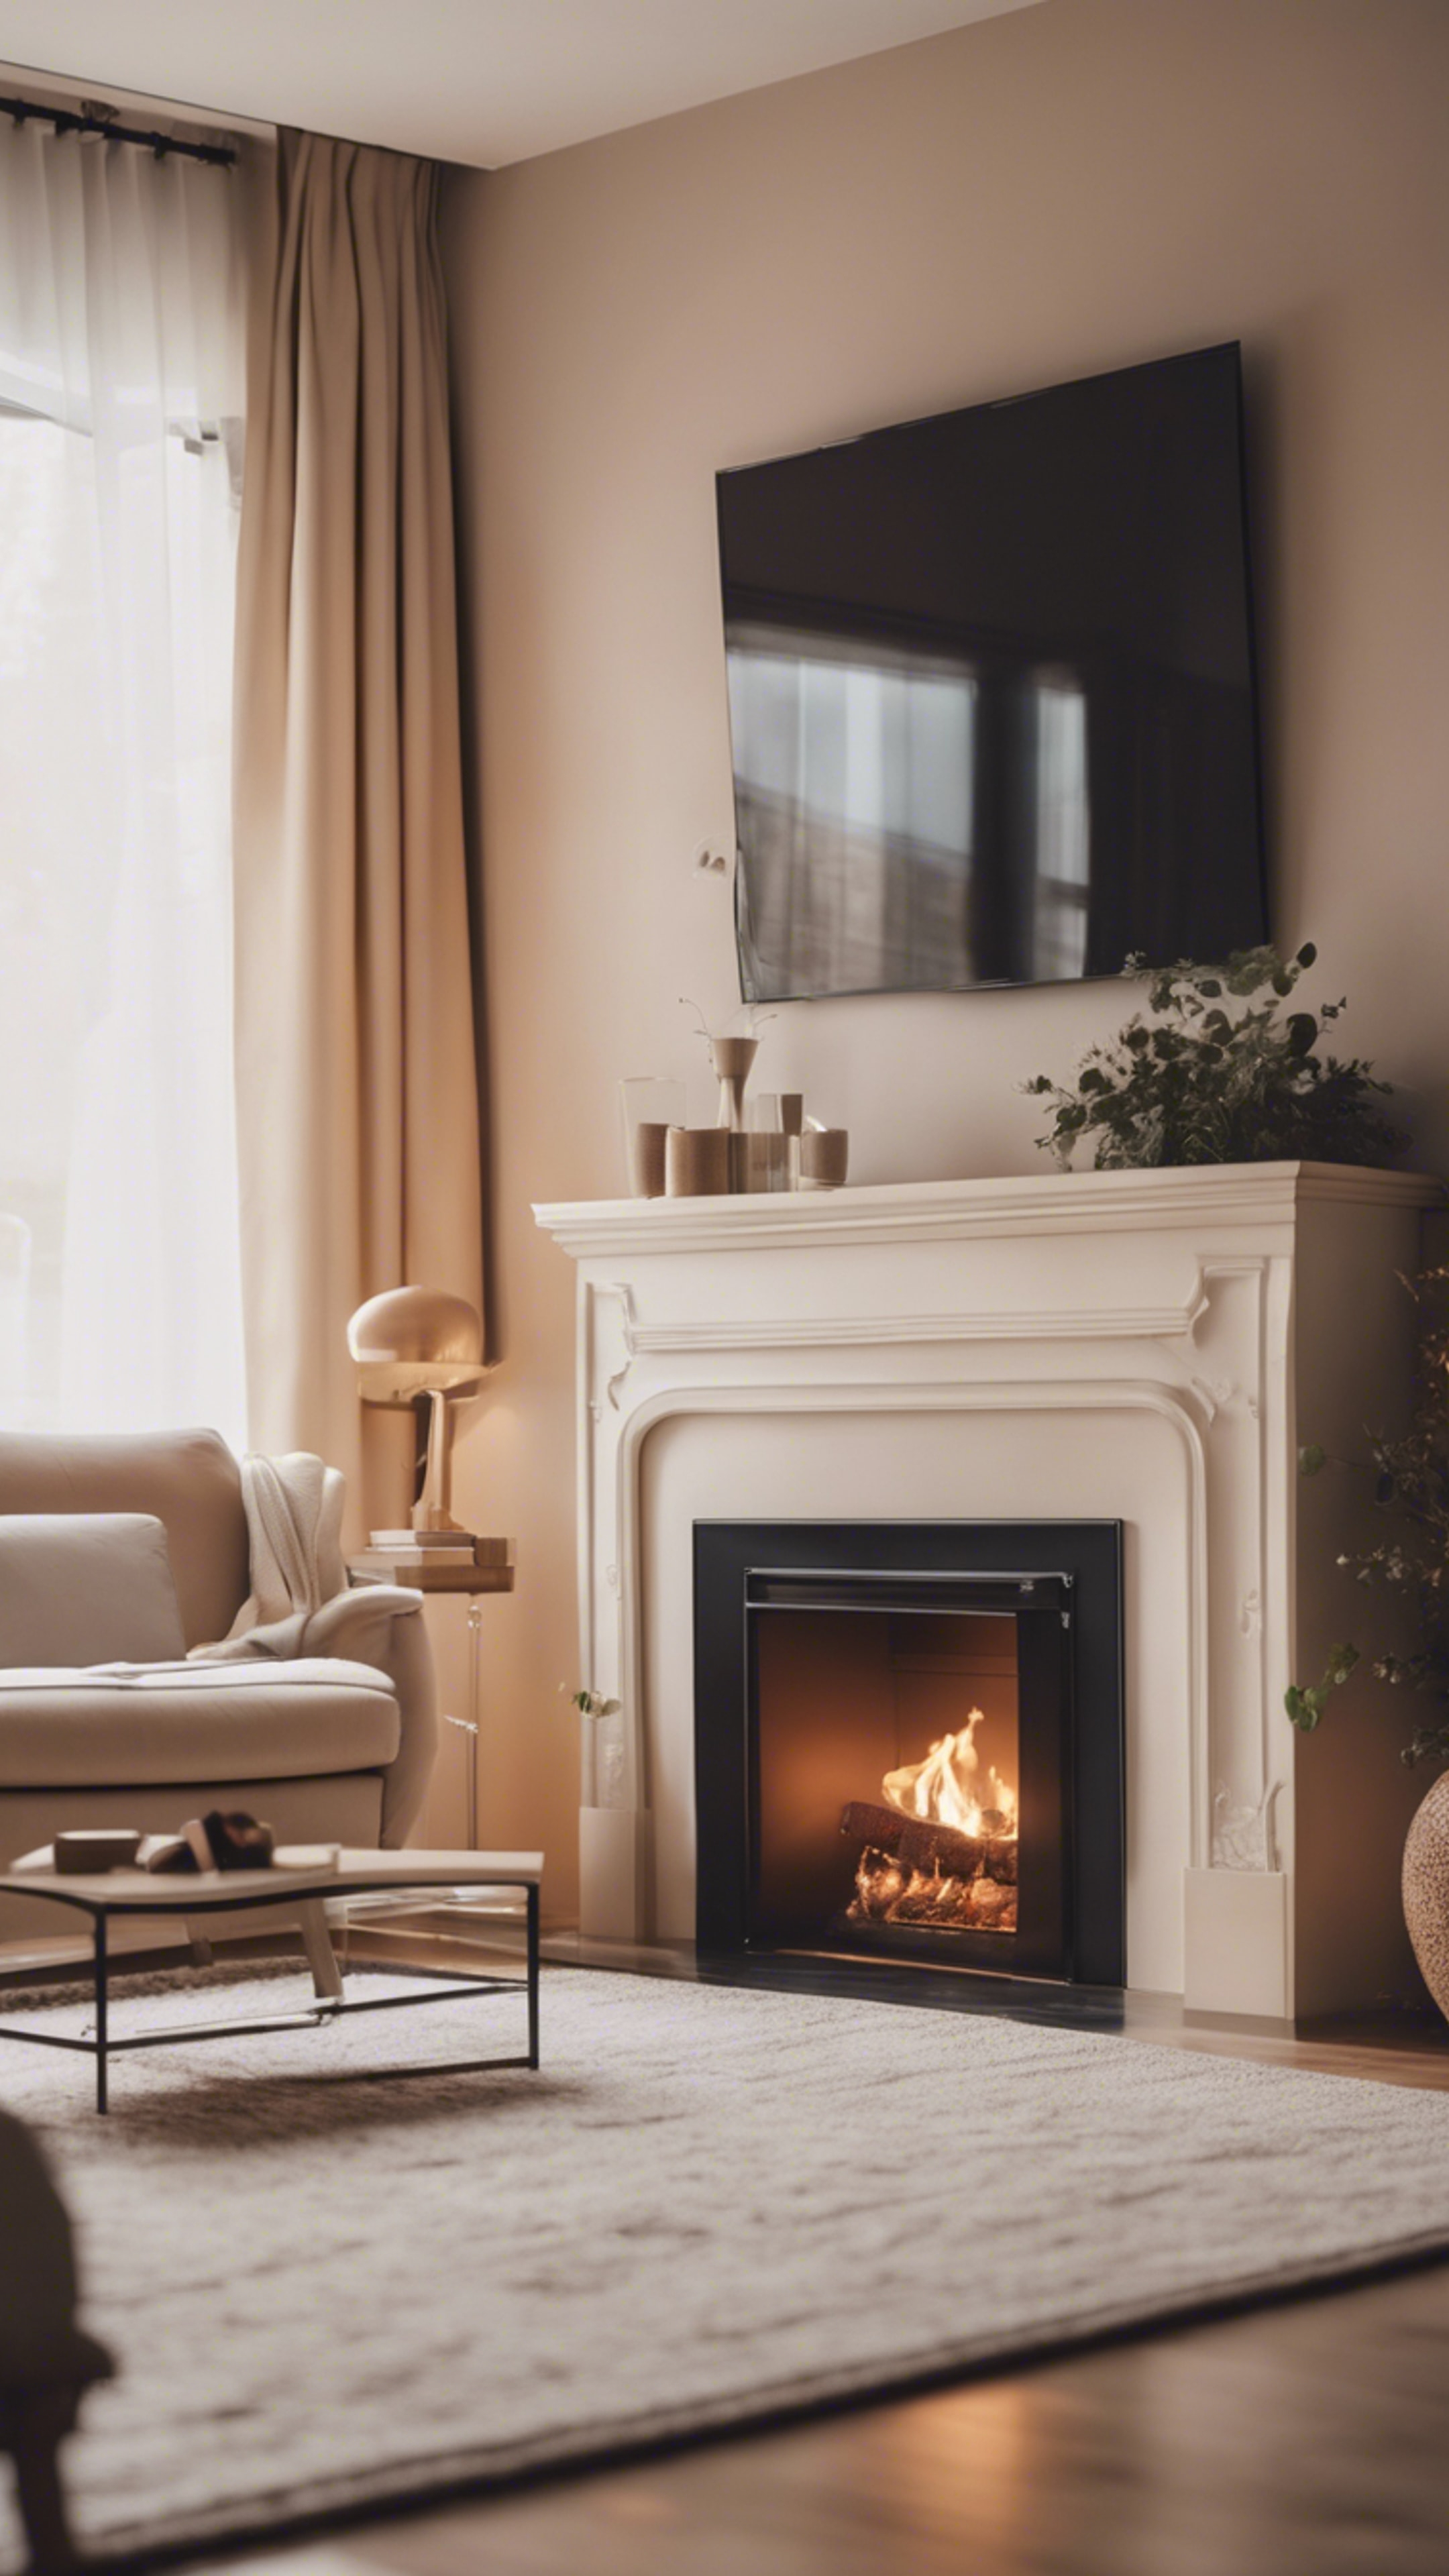 A cozy and tranquil cool beige living room with a fireplace alive with dancing flames. Tapeta[fdd7e3460c134e479b57]